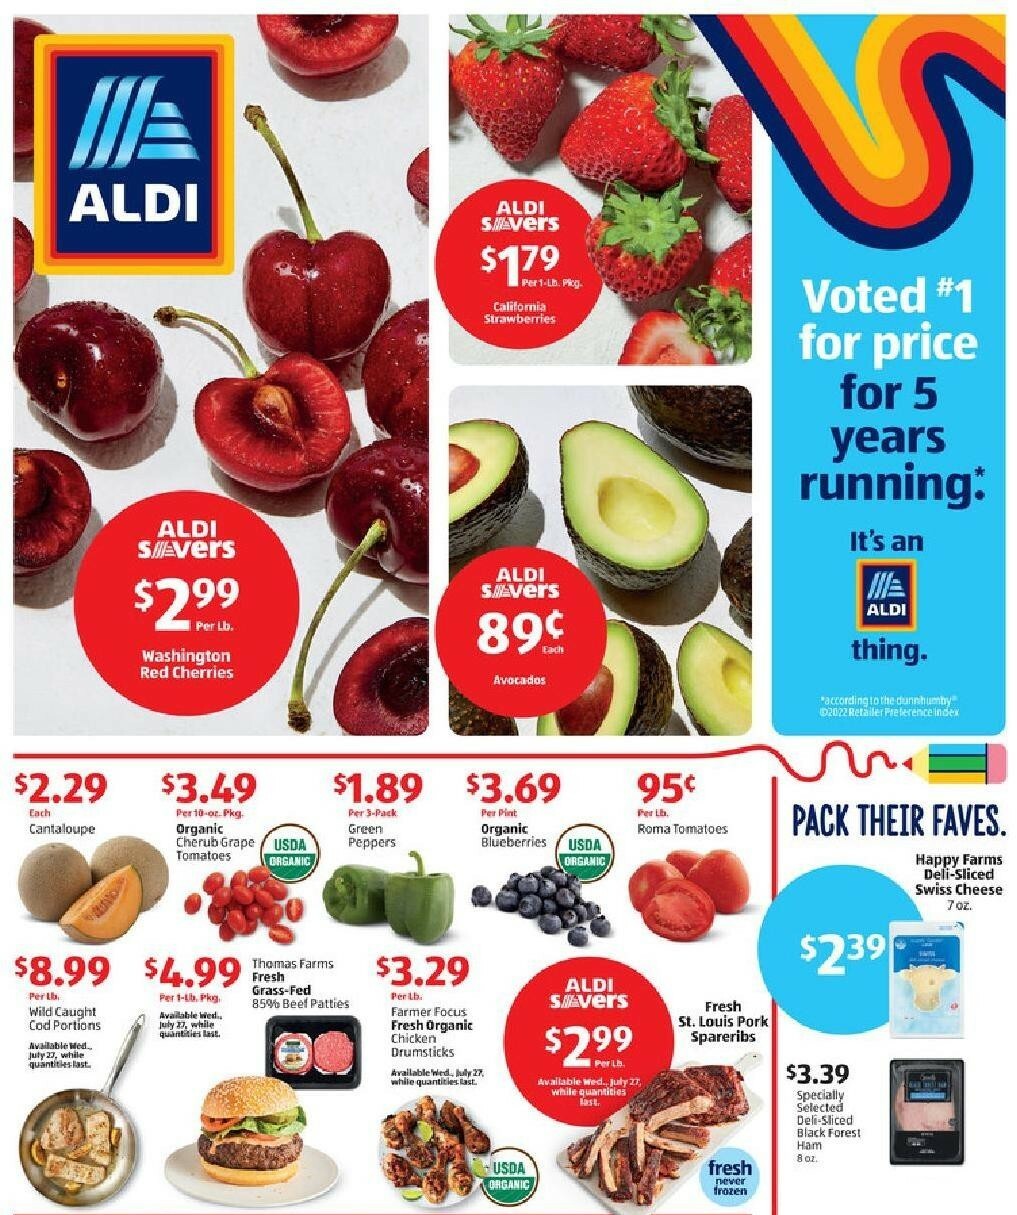 ALDI US Weekly Ads & Special Buys from July 24